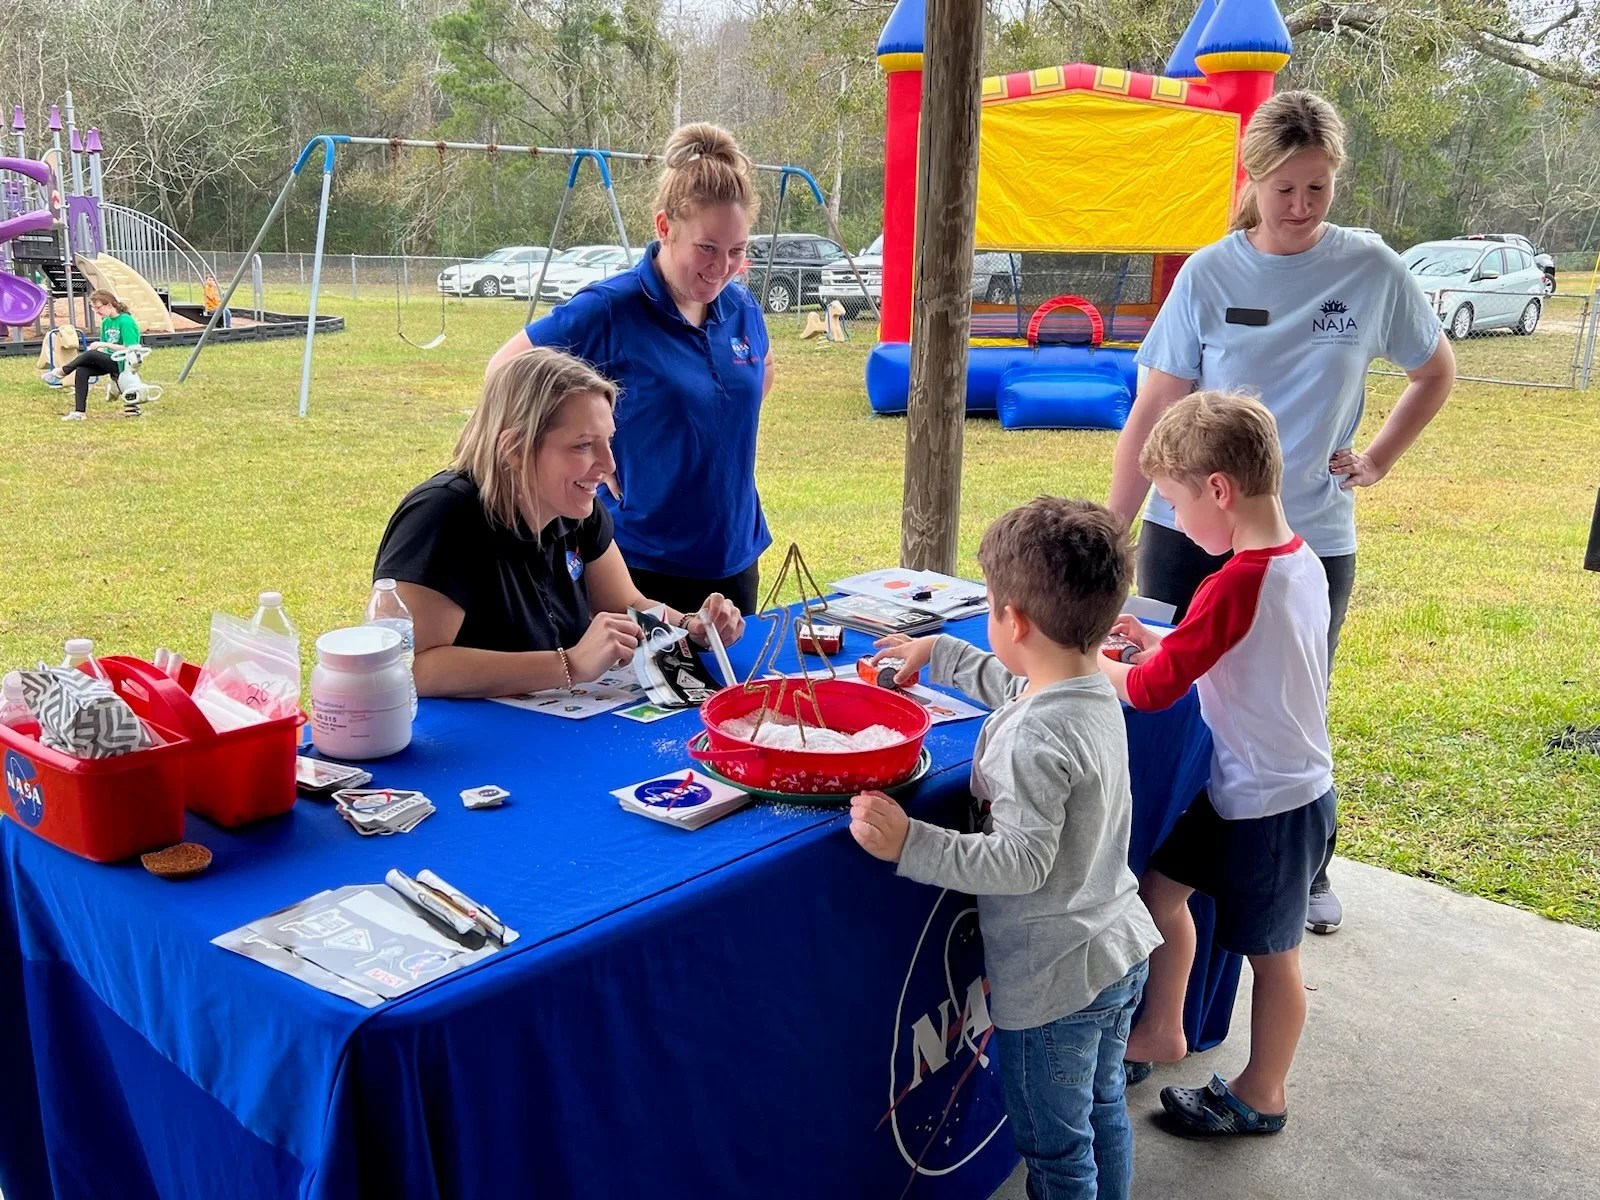 NASA ACCP team members (Morgan Necaise (l) and Kallie Crowell (r) teach children with autistic diversabilities about polymer science and robotics at the Winter Sensory Celebration hosted by Hancock County Junior Auxiliary on December 10th, 2022.